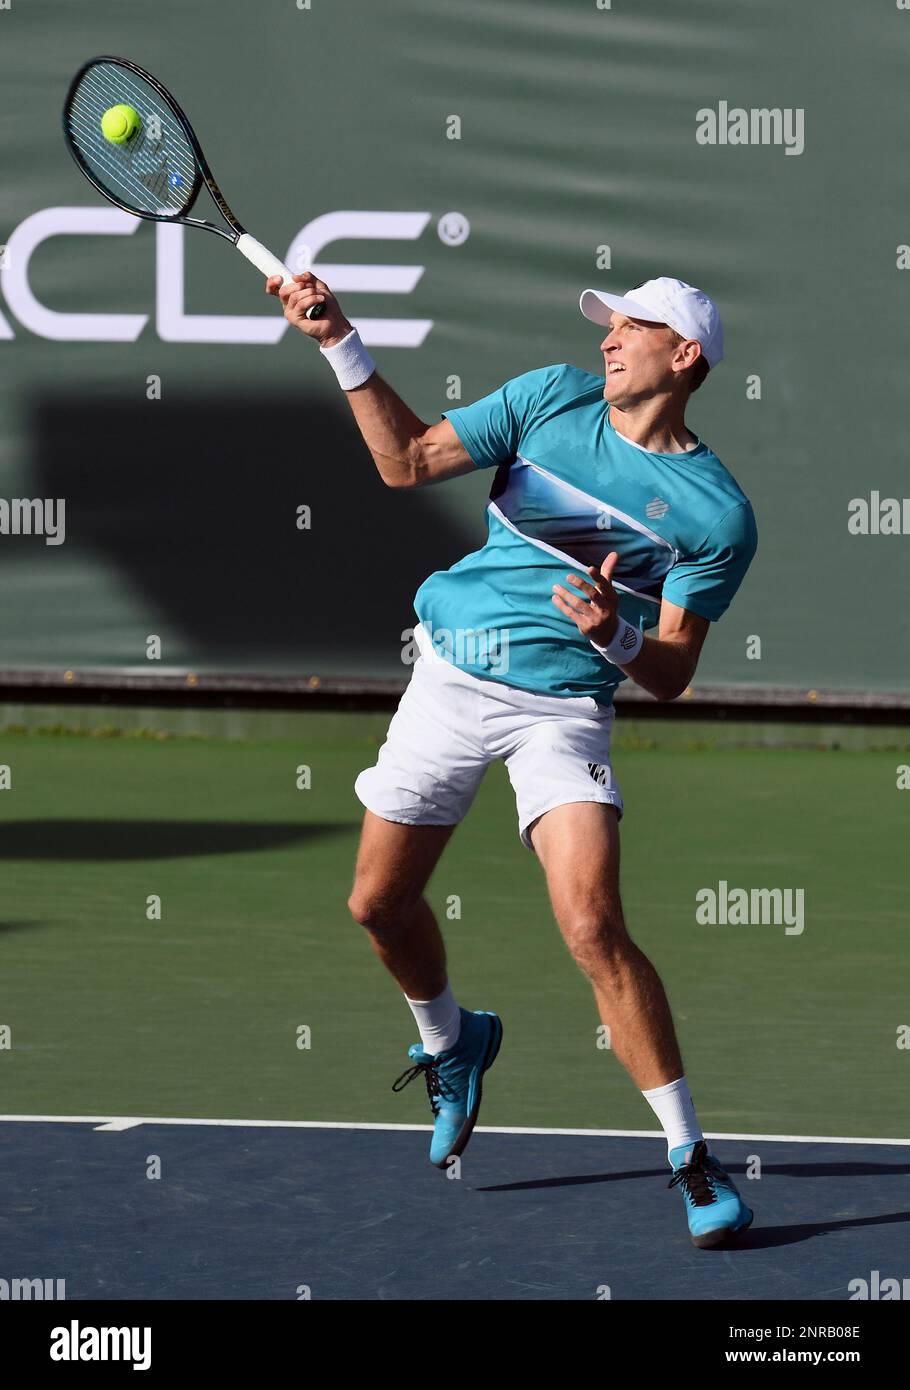 NEWPORT BEACH, CA - JANUARY 30: ATP tennis player Mitchell Krueger (USA)  returns a shot during a match at the Oracle Challenger Series tennis  tournament played on January 30, 2020 at the